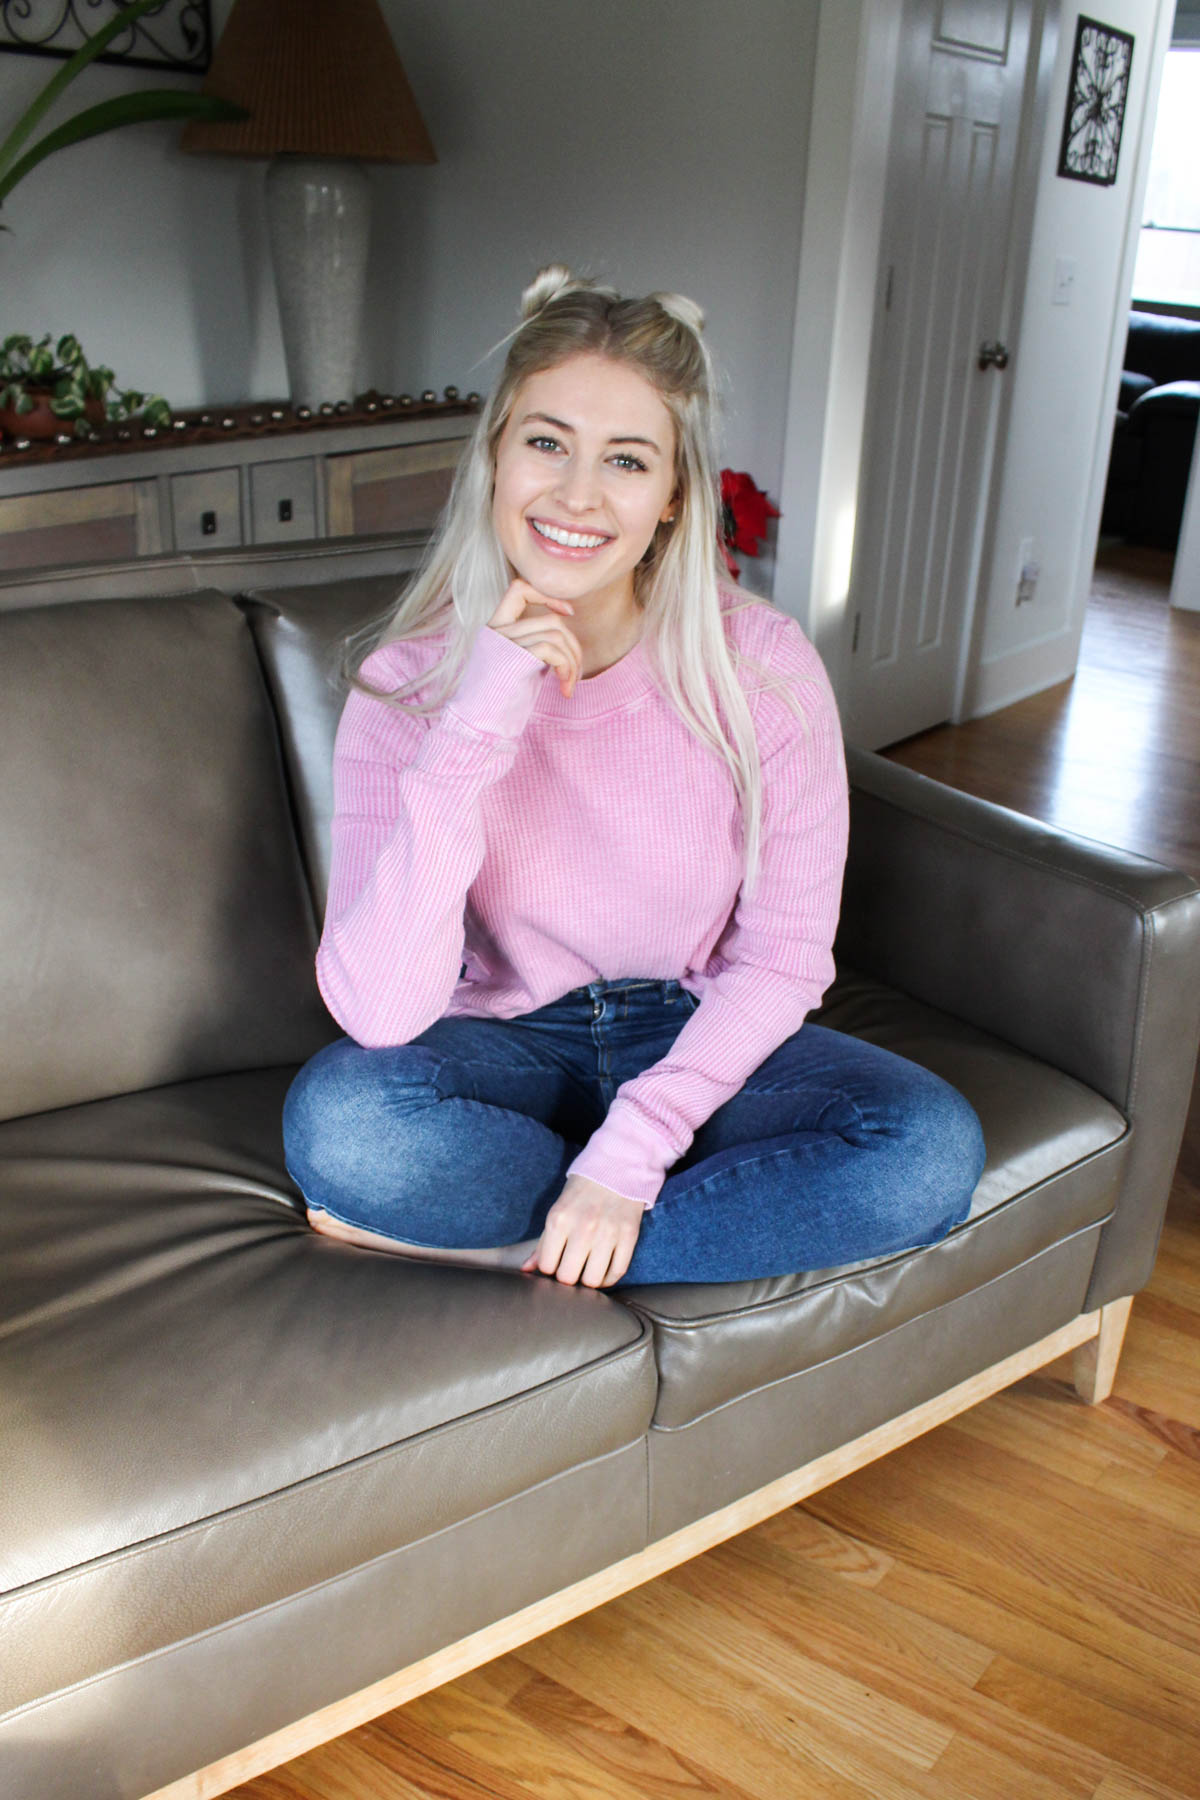 Girl sitting on couch with pink sweater and jeans.